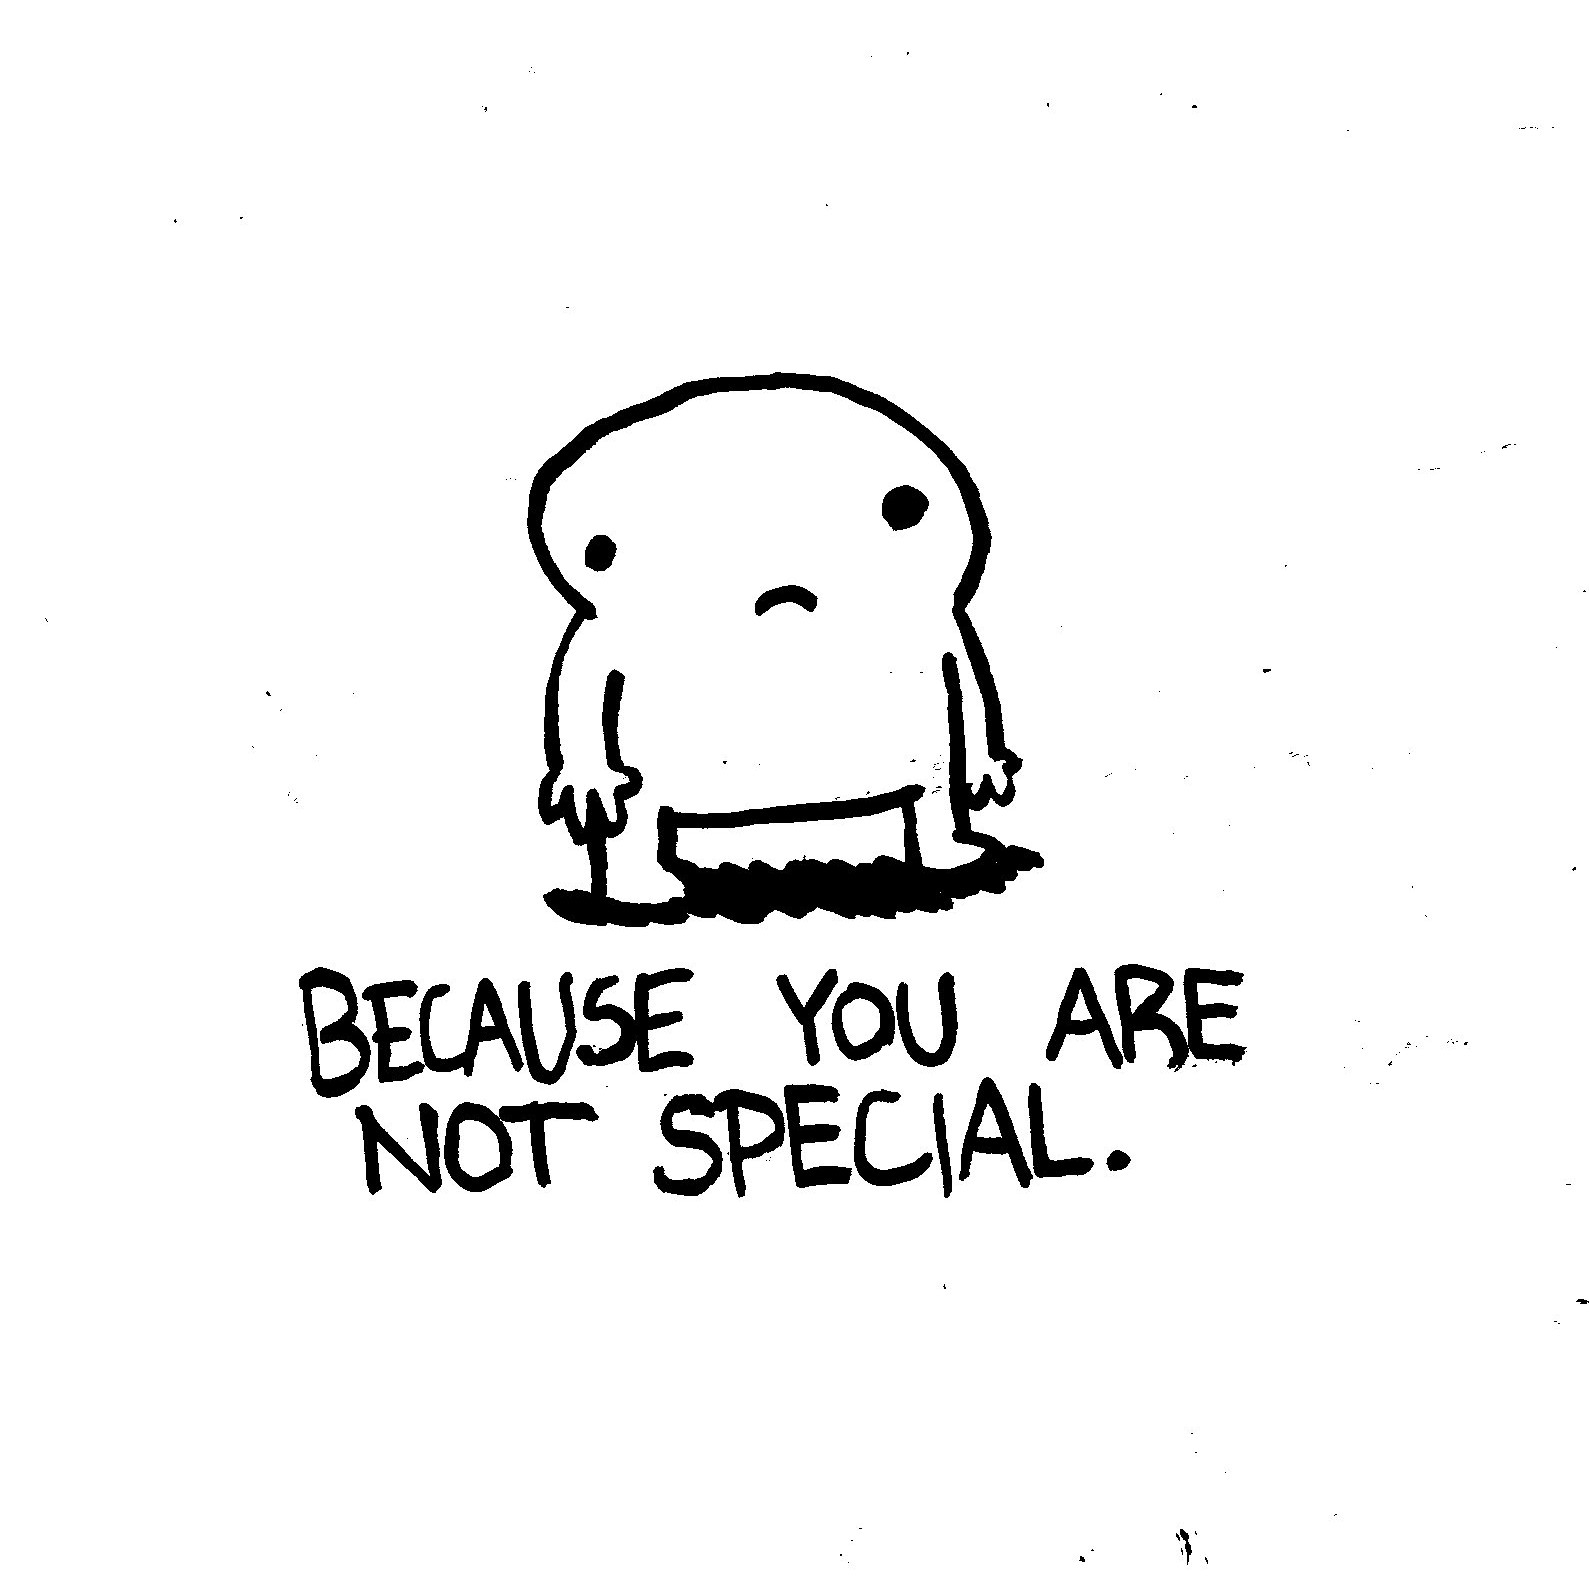 Because you are not special.